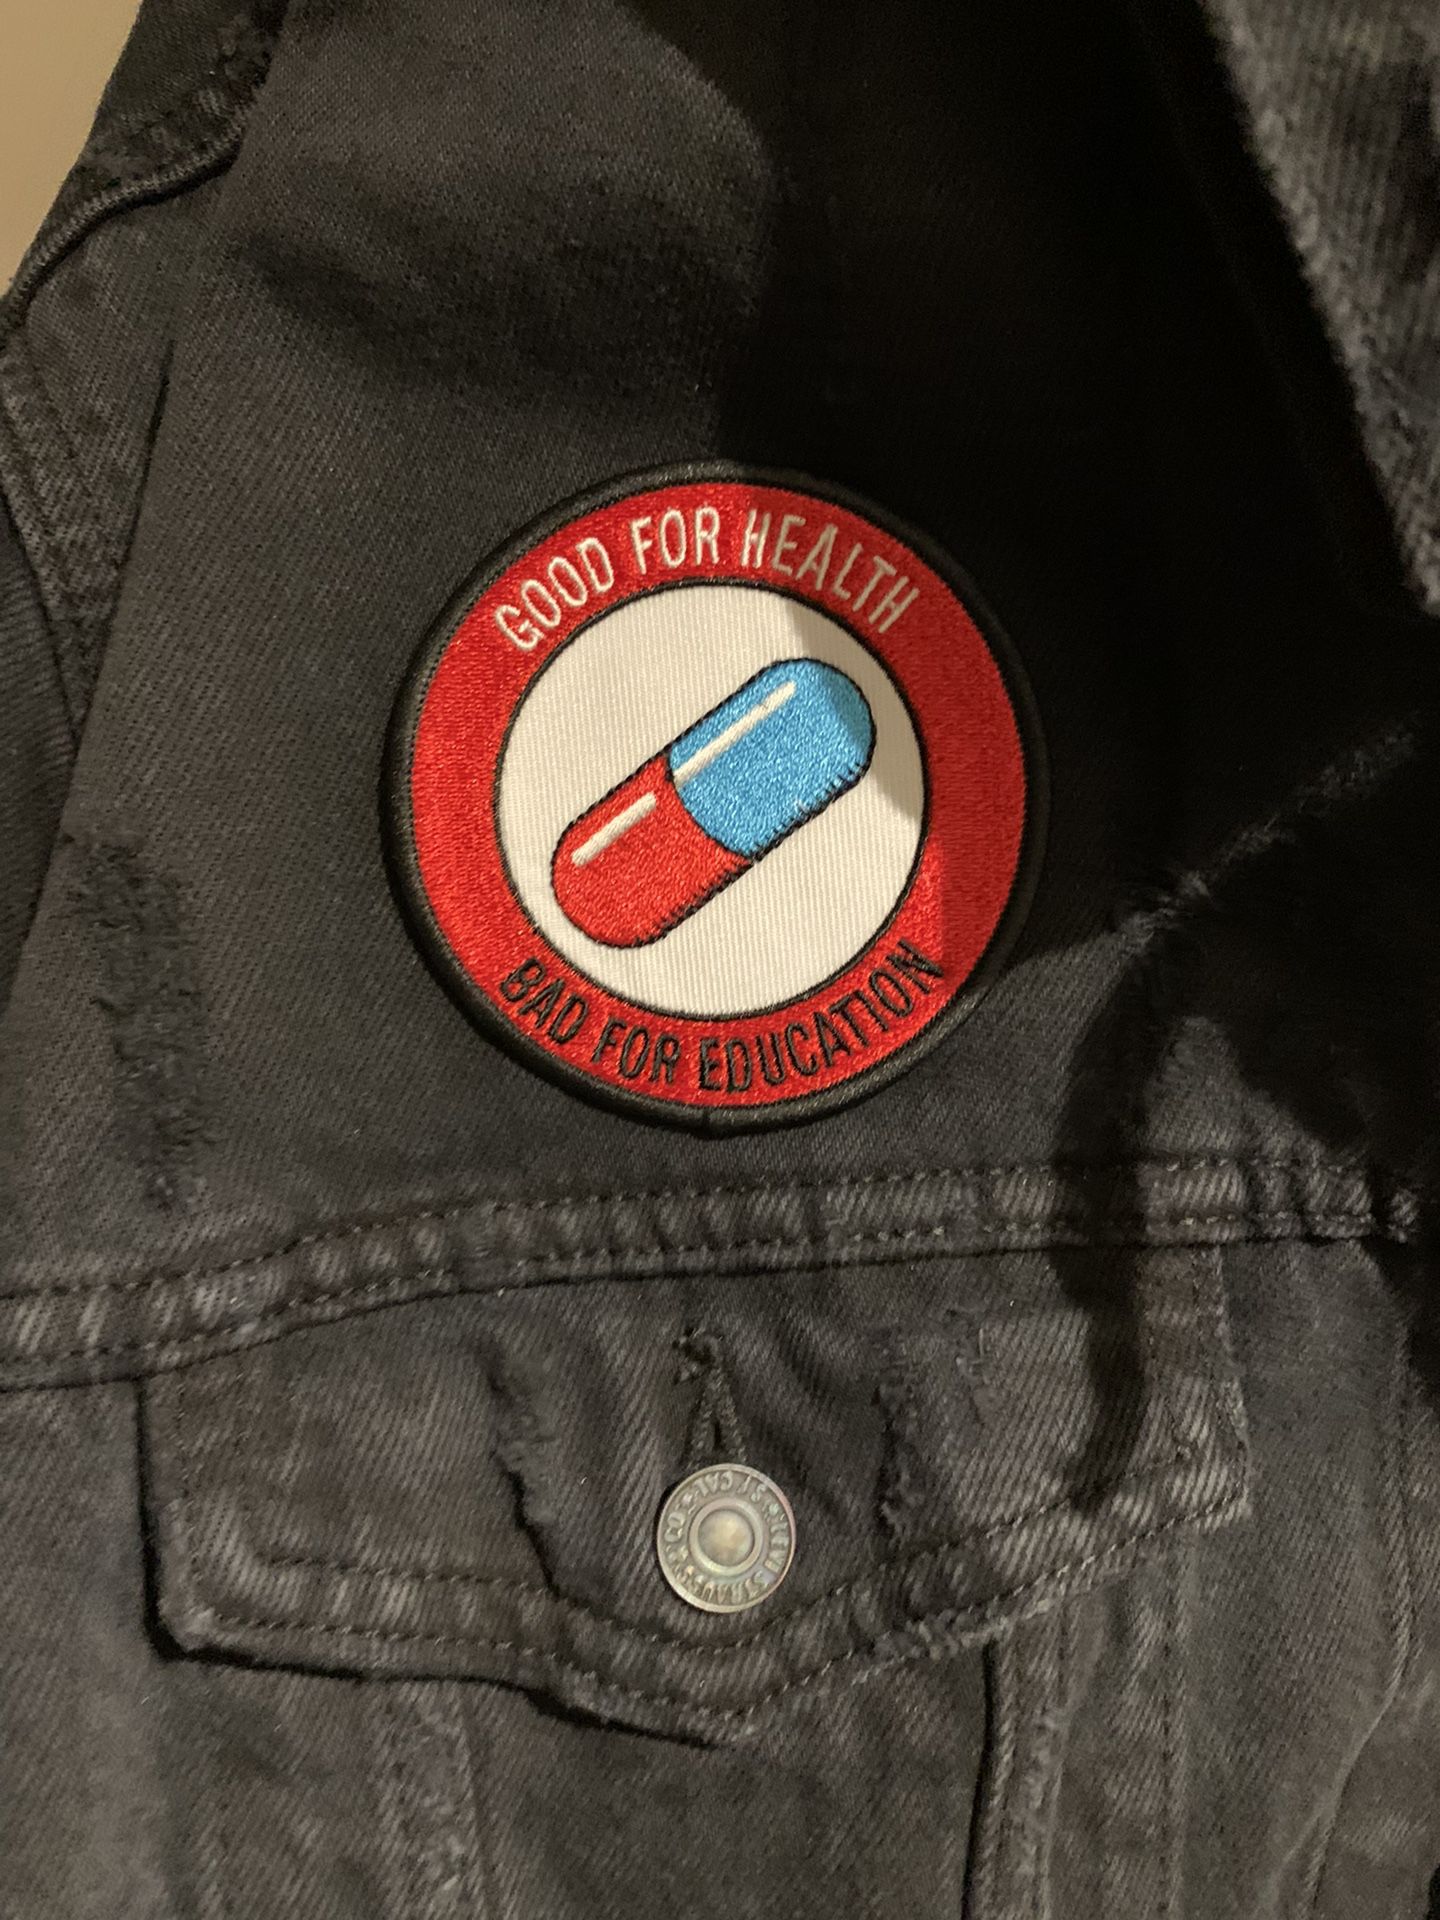 Denim Jacket With Iron On Patch